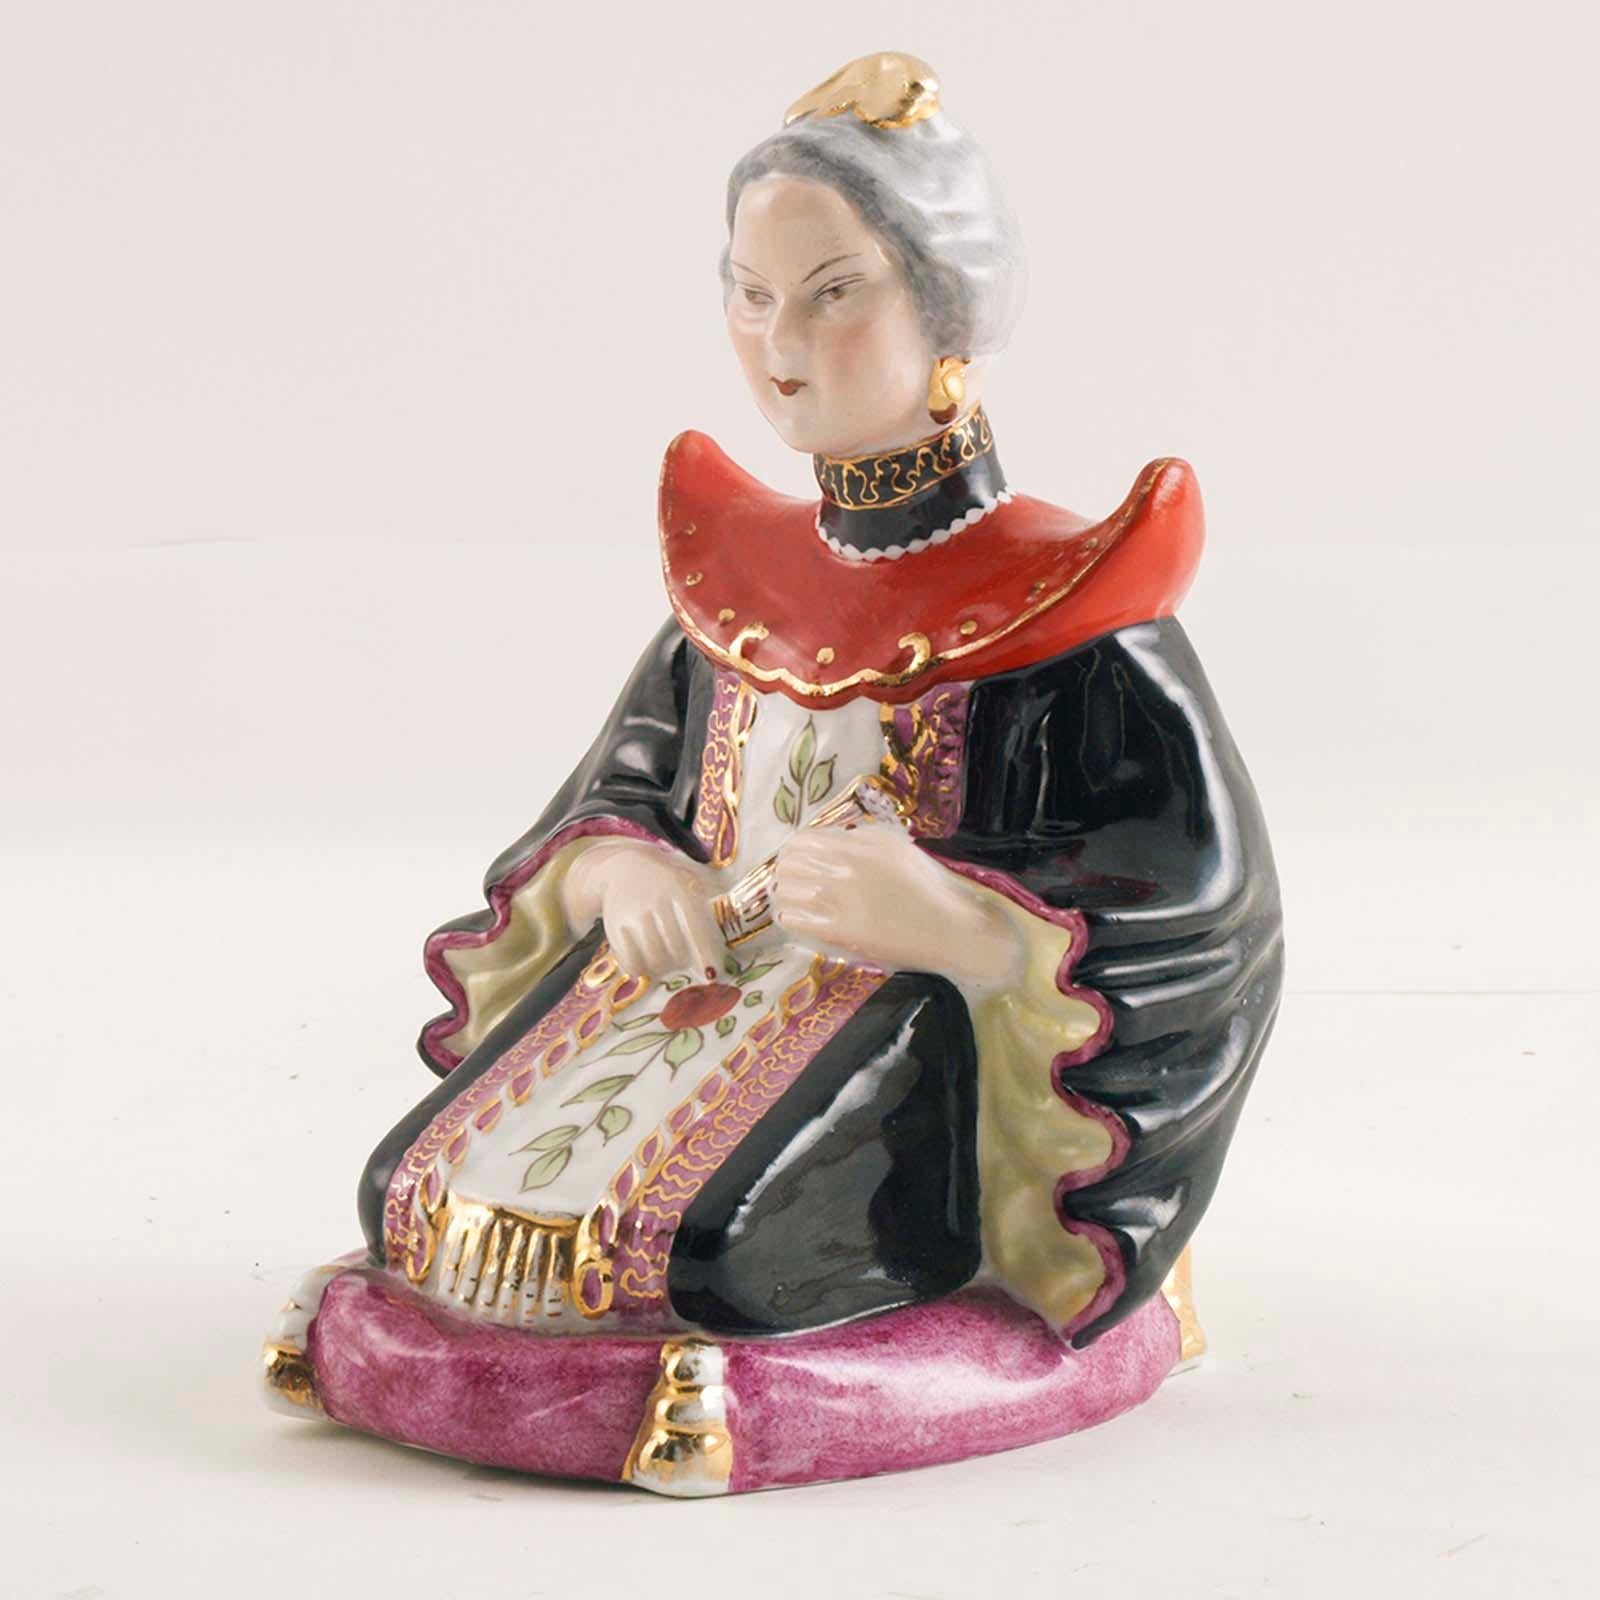 Late 19th century antique Brazilian signed Porcelain Vieira De Castro Rio
This delicate Brazilian porcelain reppresenting a noble chinese woman holding her folding fan brings you back to the ancient Chinese Empire times with its hand carved and